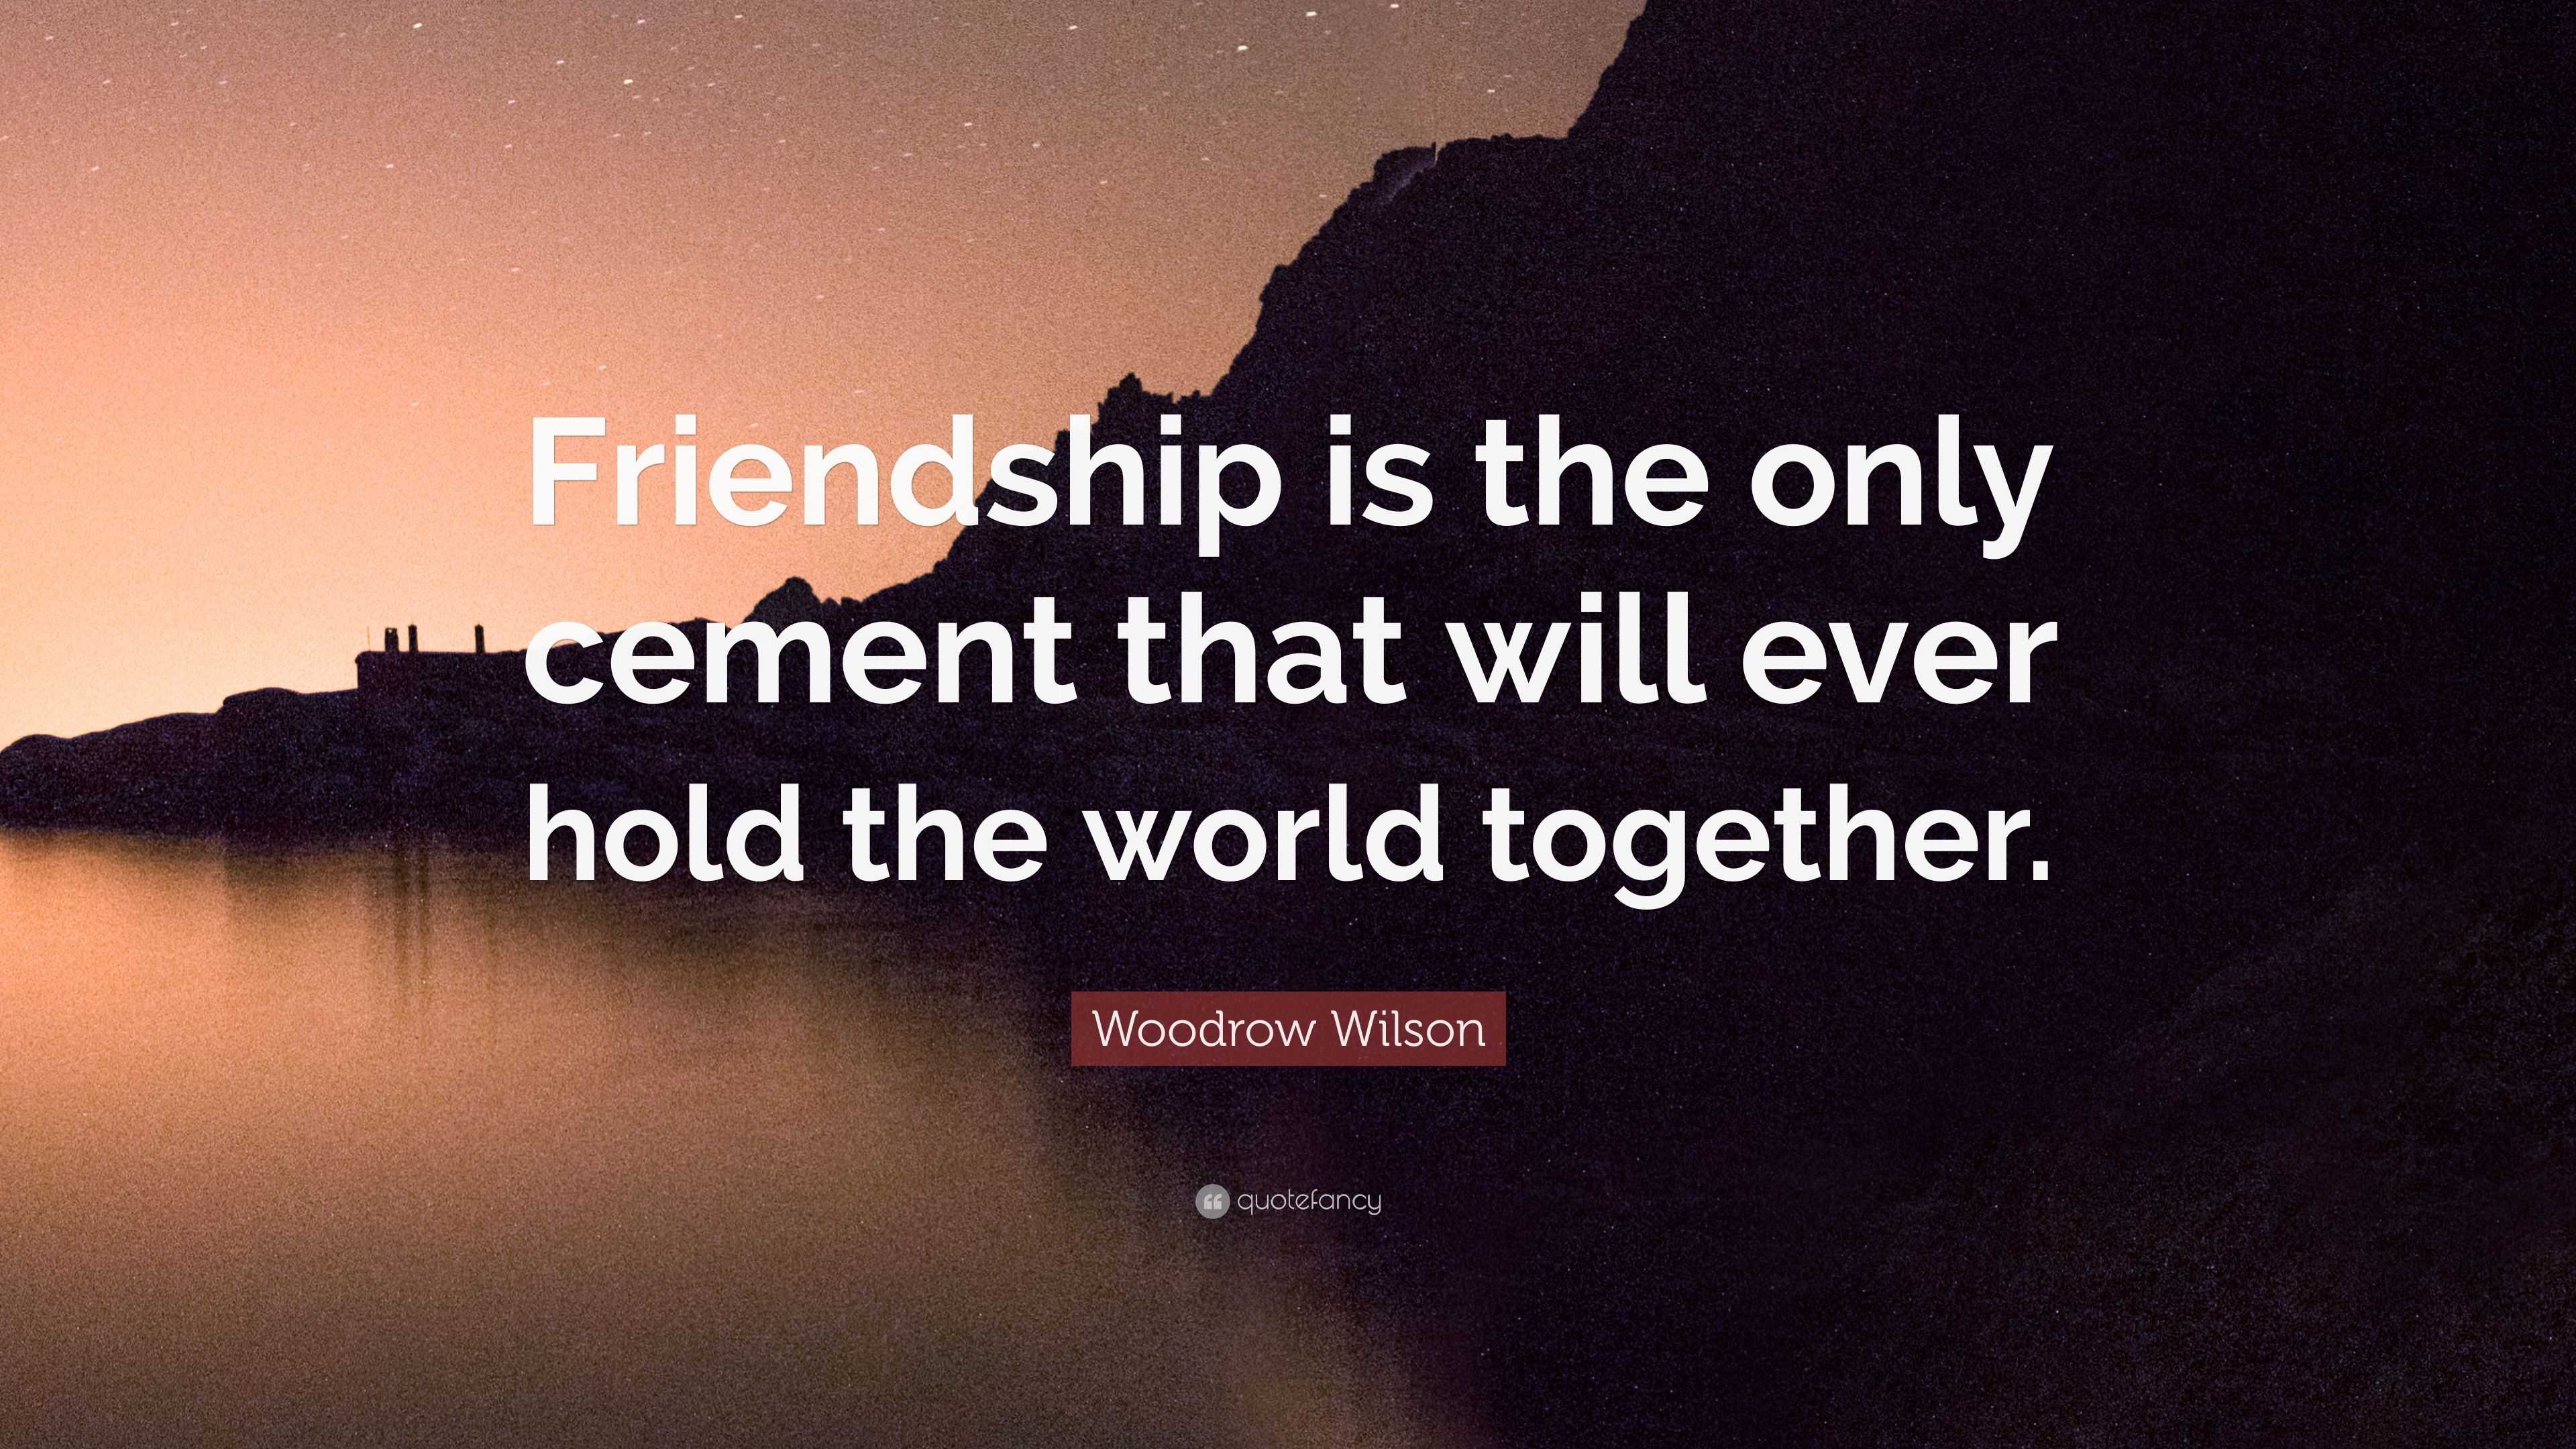 Woodrow Wilson Quote: “Friendship is the only cement that will ever ...